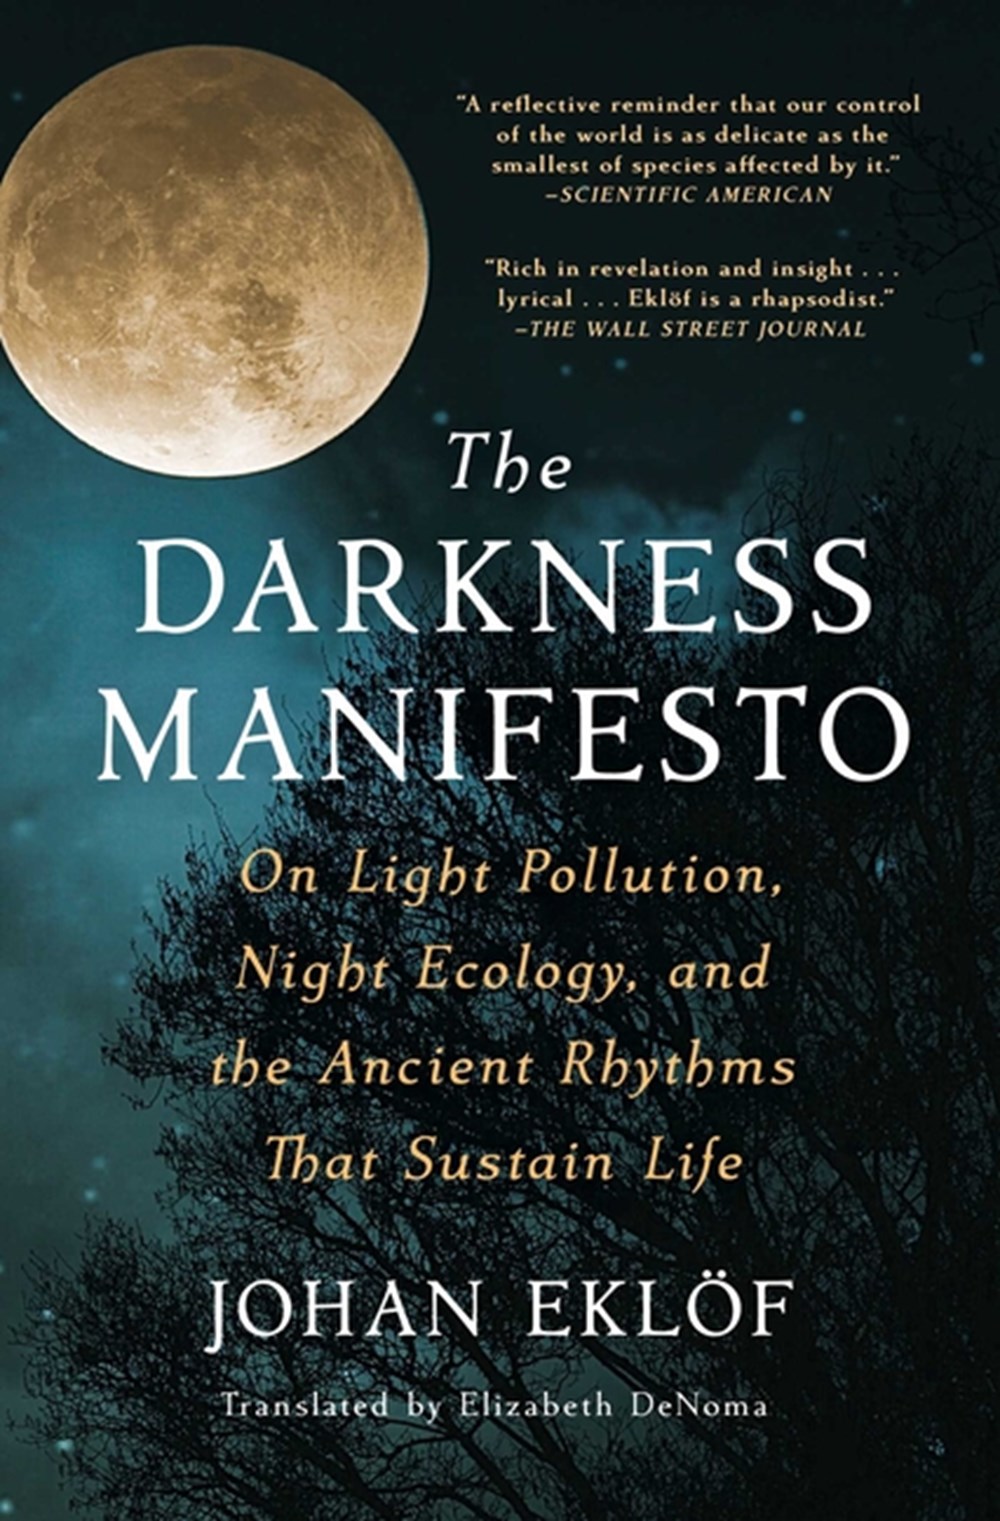 Darkness Manifesto: On Light Pollution, Night Ecology, and the Ancient Rhythms That Sustain Life